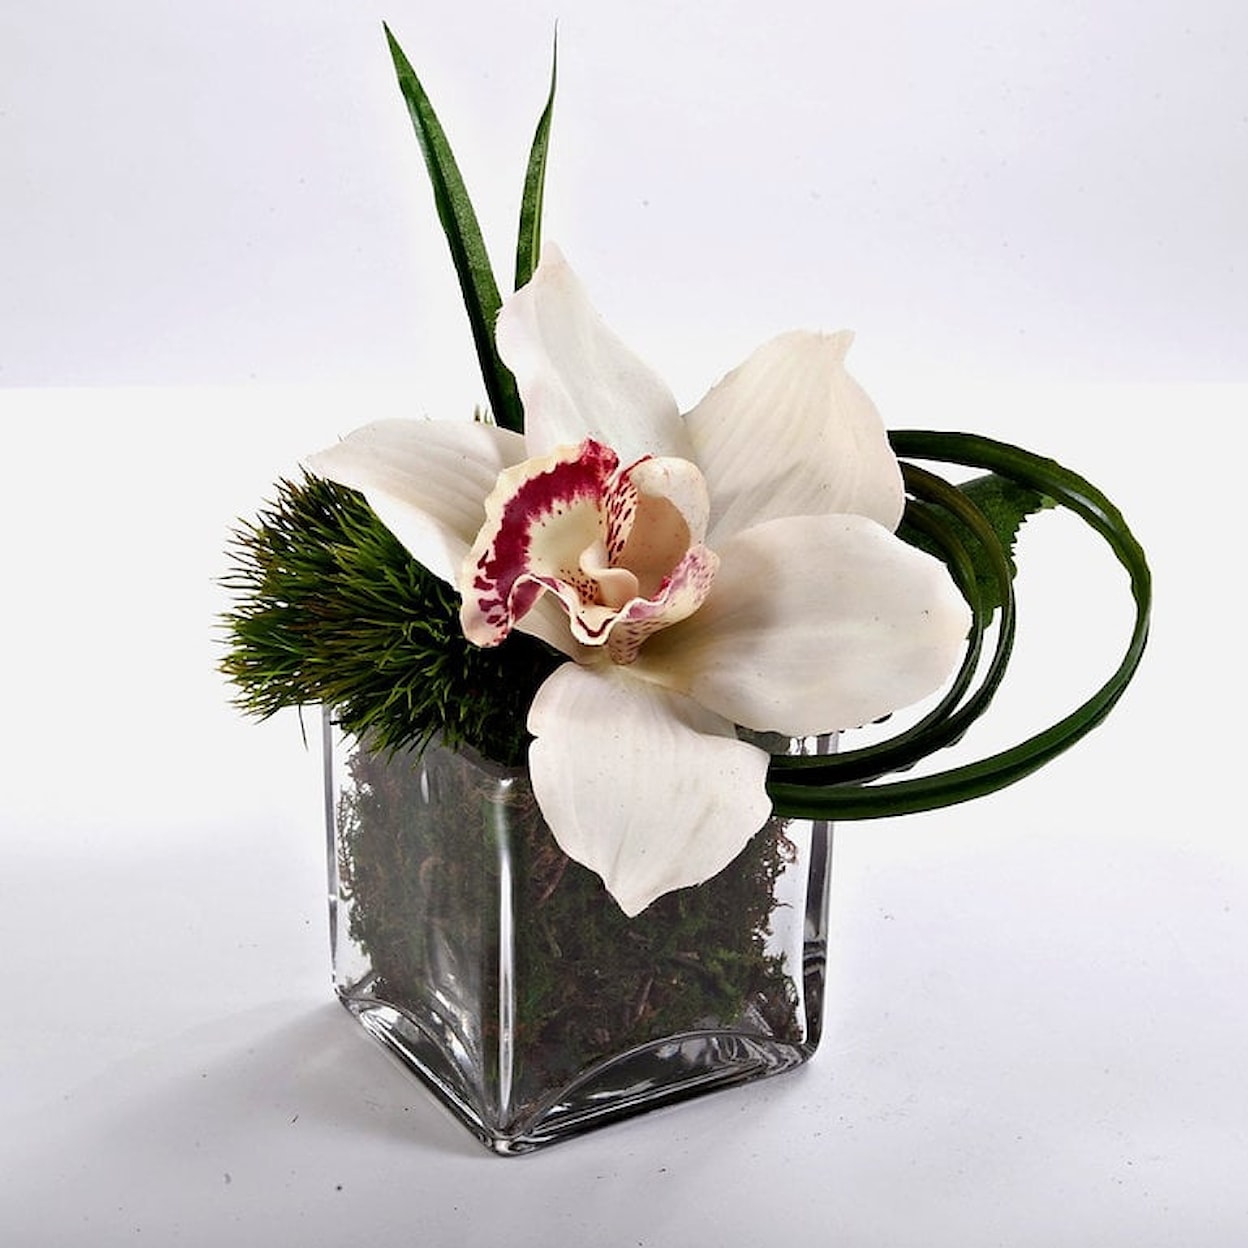 The Ivy Guild Florals Cymbidium Orchid in 3" Glass